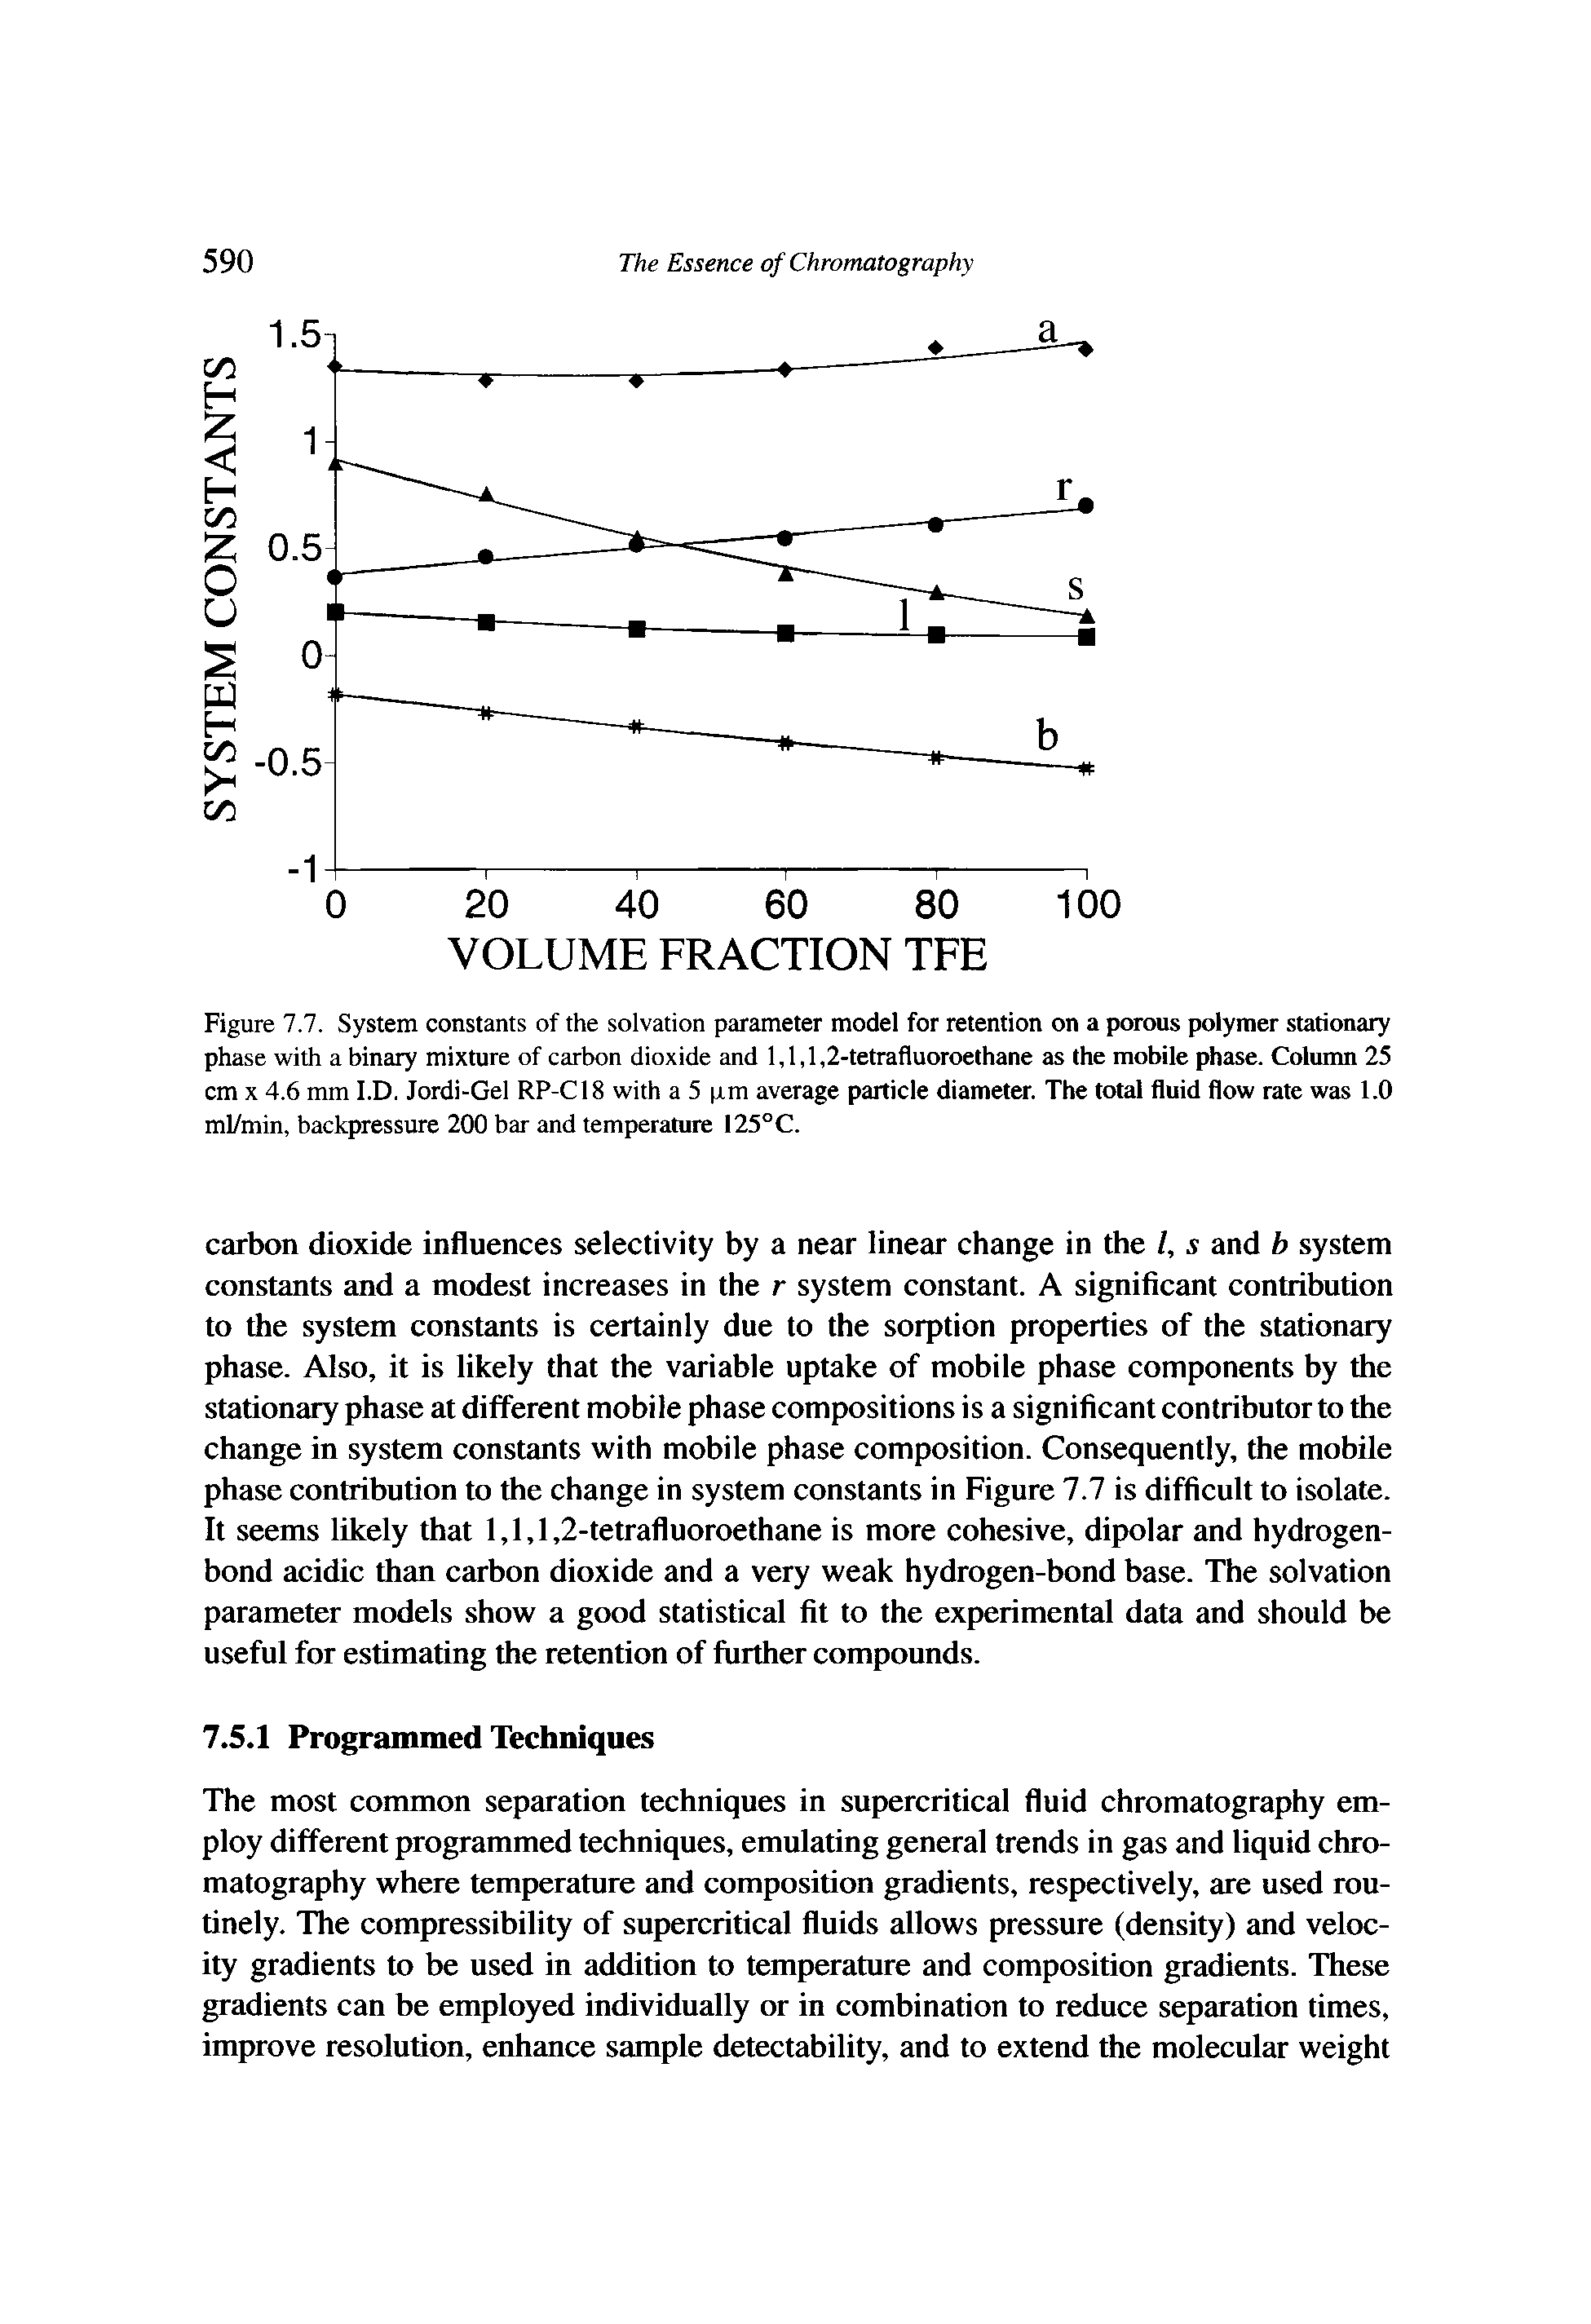 Figure 7.7. System constants of the solvation parameter model for retention on a porous polymer stationary phase with a binary mixture of carbon dioxide and 1,1,1,2-tetrafluoroethane as the mobile phase. Column 25 cm X 4.6 mm I.D. Jordi-Gel RP-C18 with a 5 pm average particle diameter. The total fluid flow rate was 1.0 ml/min, backpressure 200 bar and ternperamre I25°C.